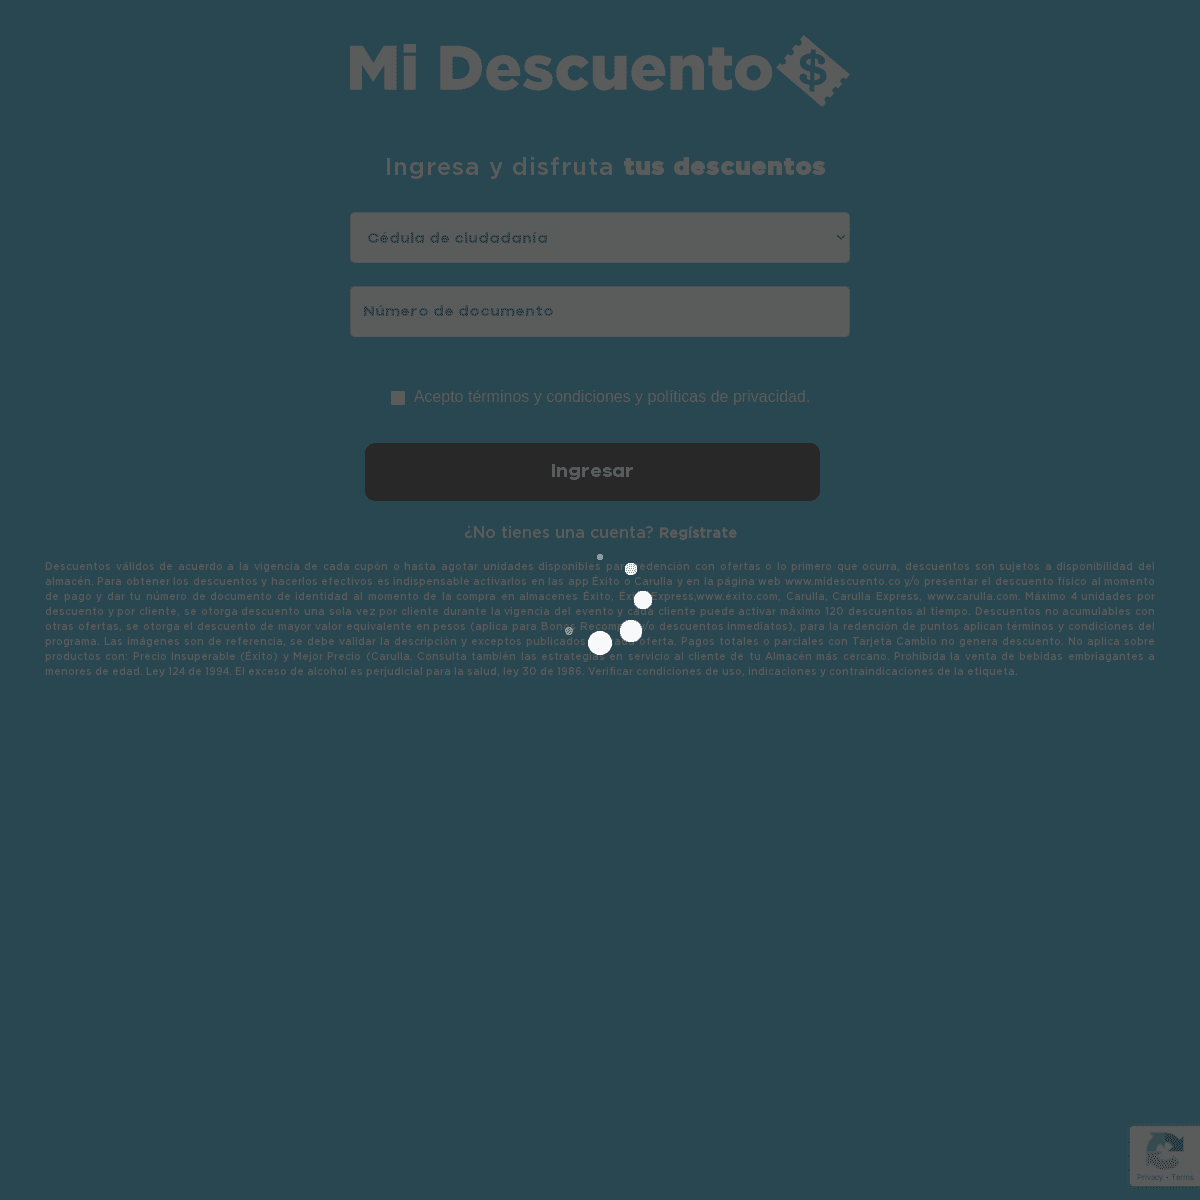 A complete backup of https://www.midescuento.co/home